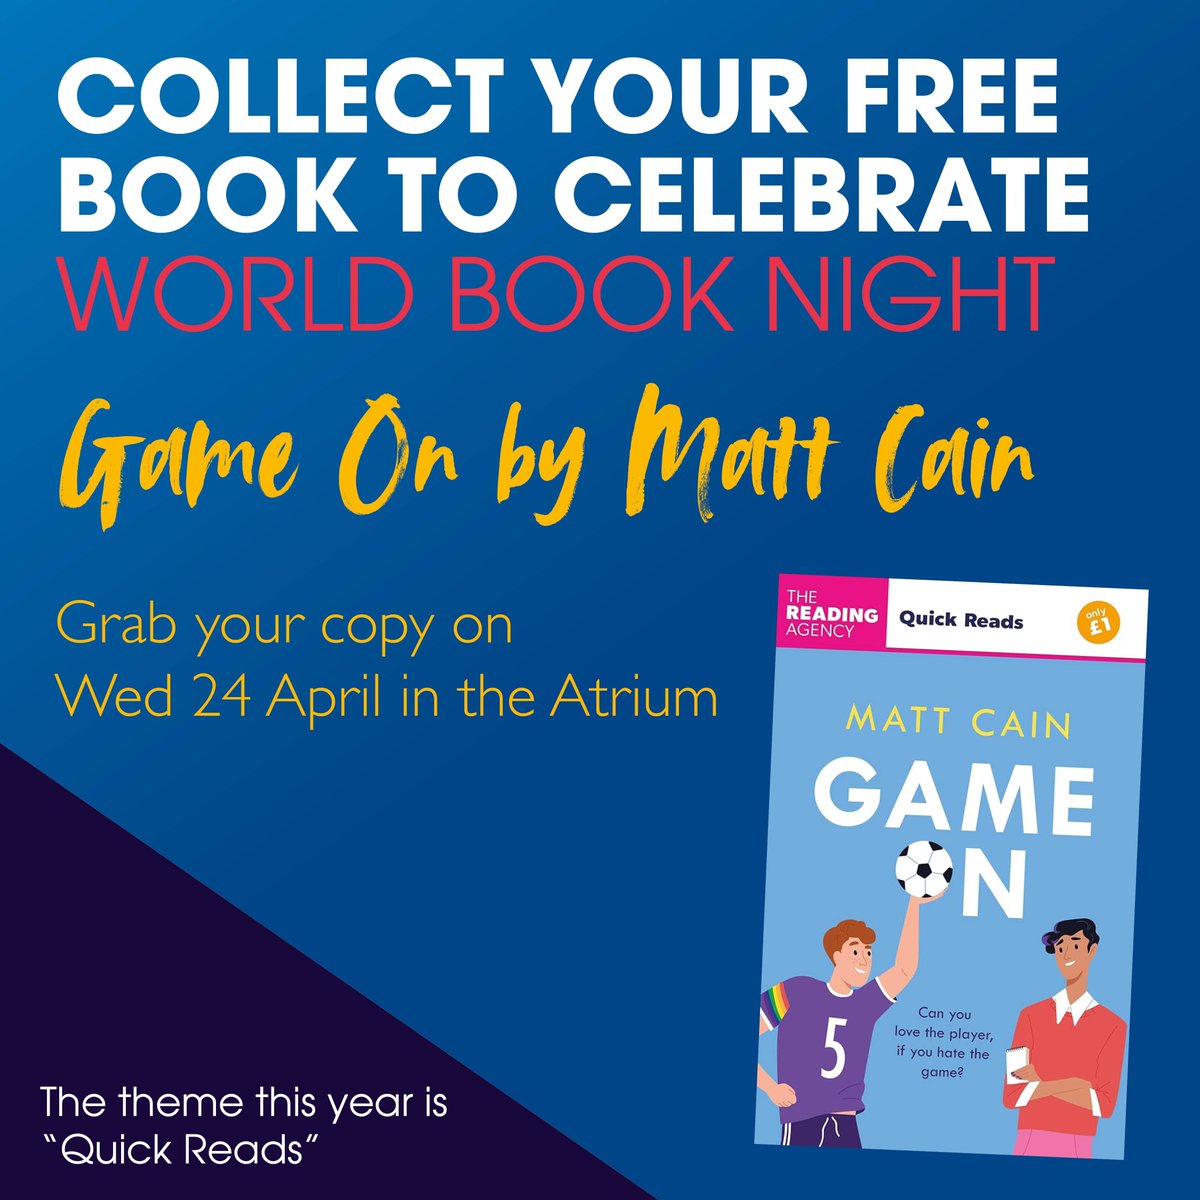 Celebrate the power of reading for World Book Night! 📖 Collect a FREE copy of 'Game On' by Matt Cain in our Atrium on Wednesday 24 April with this year's theme being 'Quick Reads'. Bookmark the date and make sure you to pick up your copy!